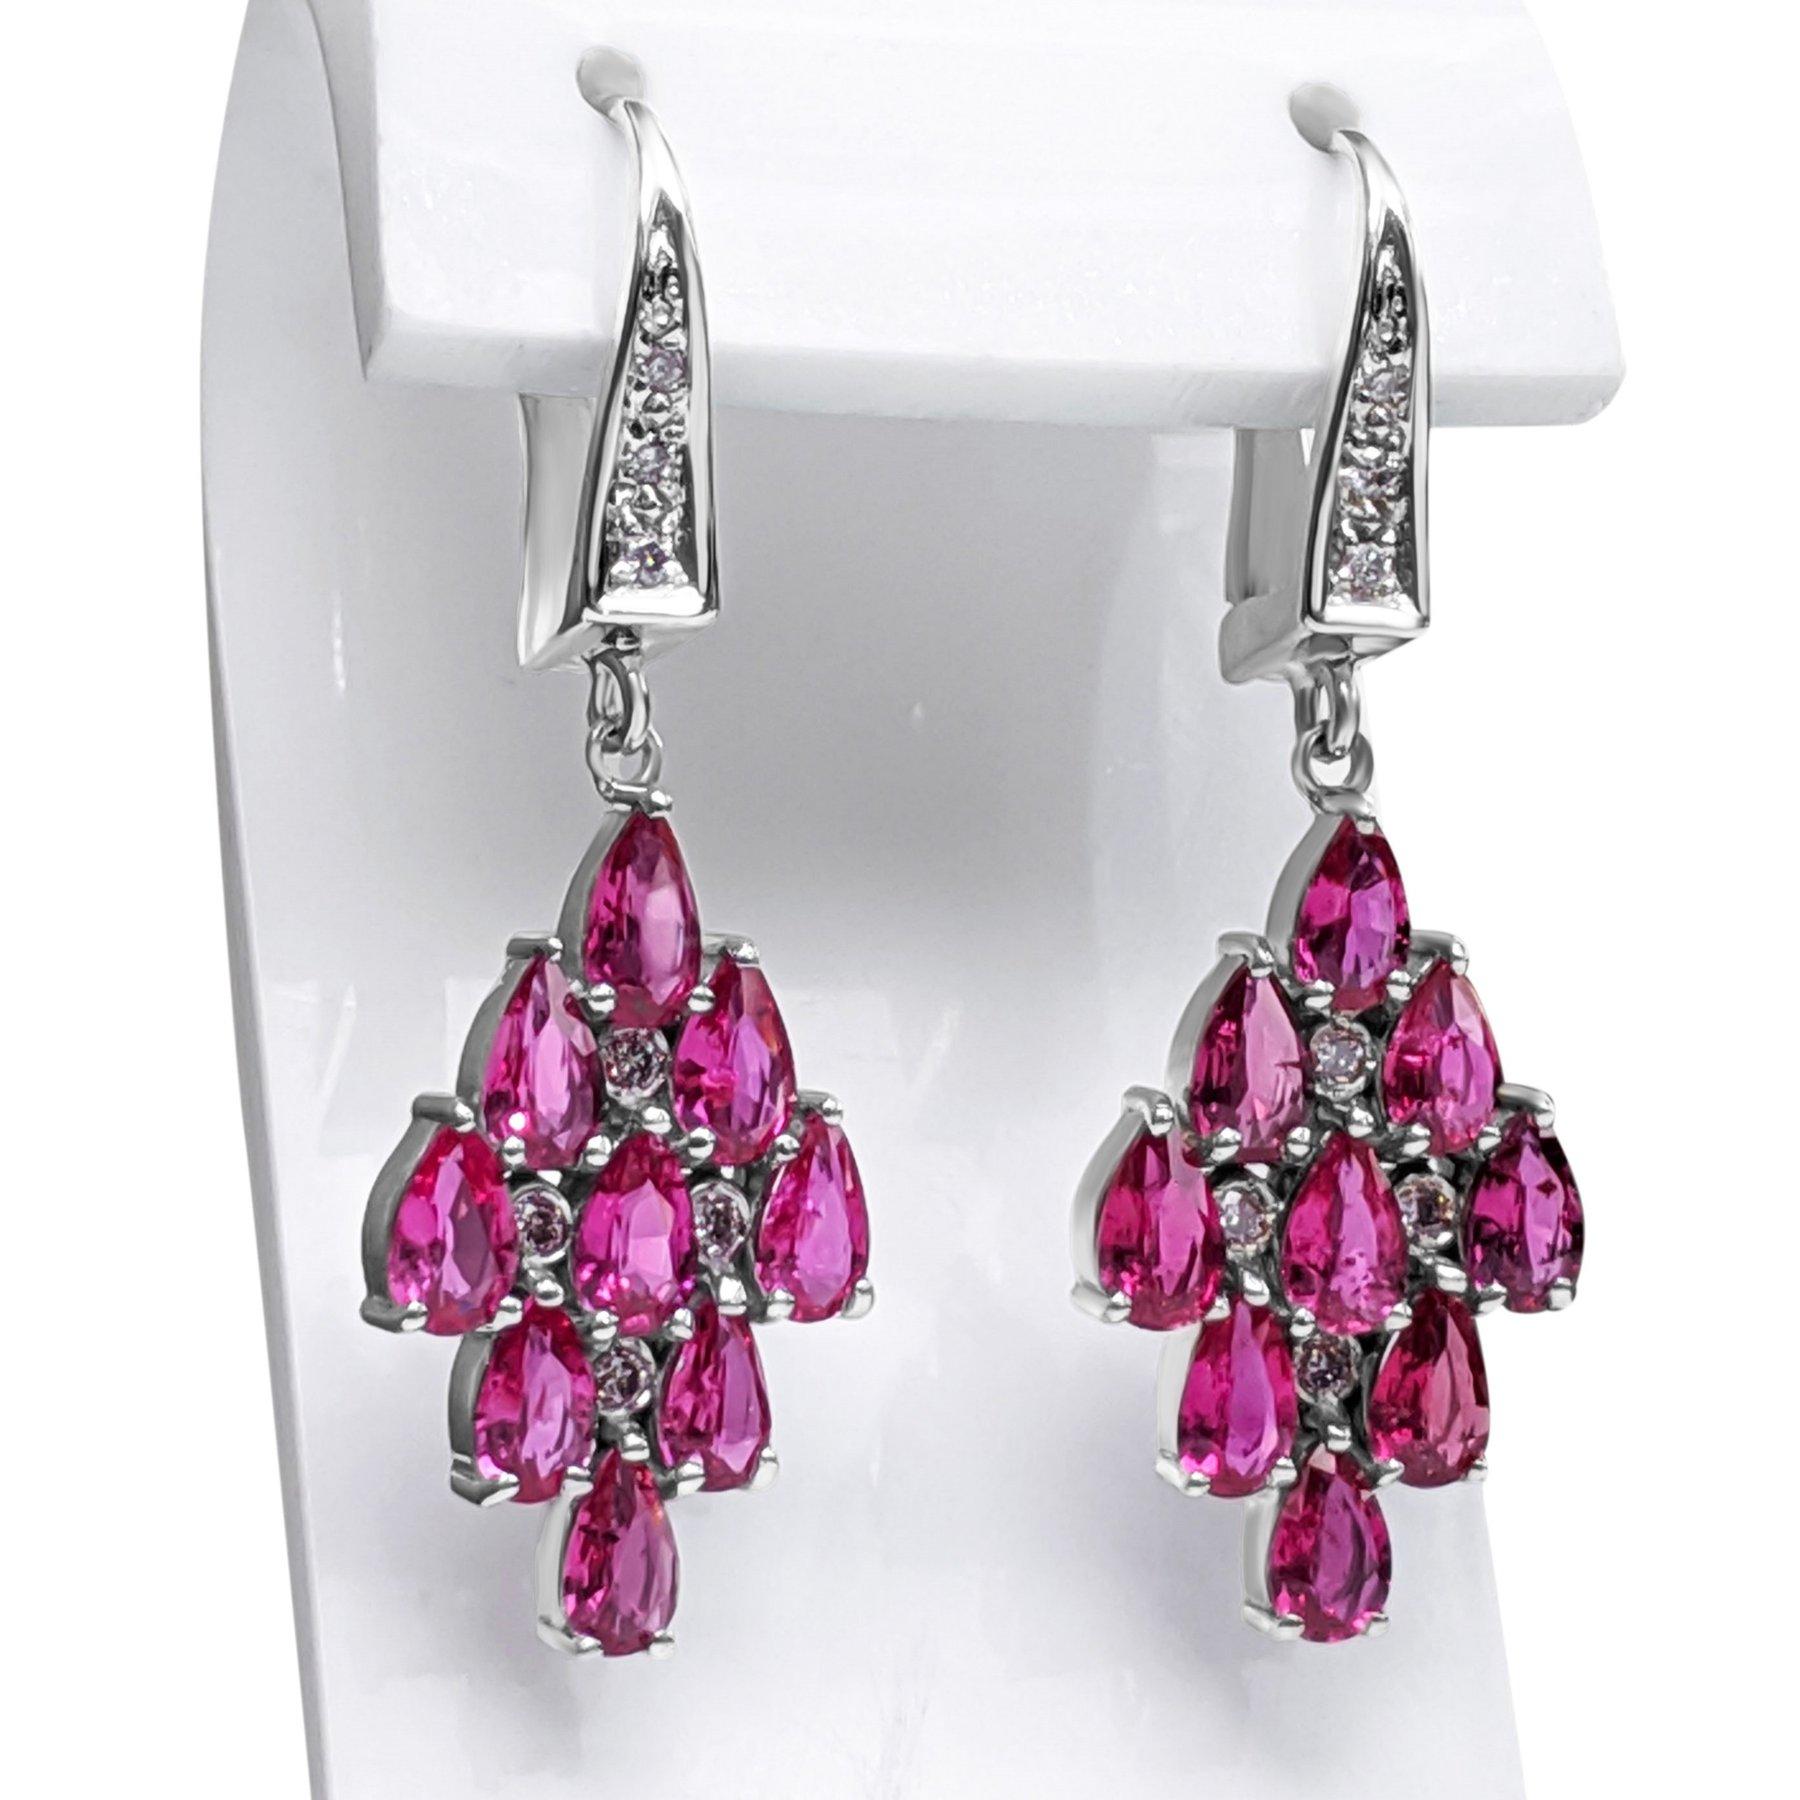 Art Deco $1 NO RESERVE! 3.57Ct NO HEAT Ruby & 0.15Ct Fancy Pink 14kt White Gold Earrings